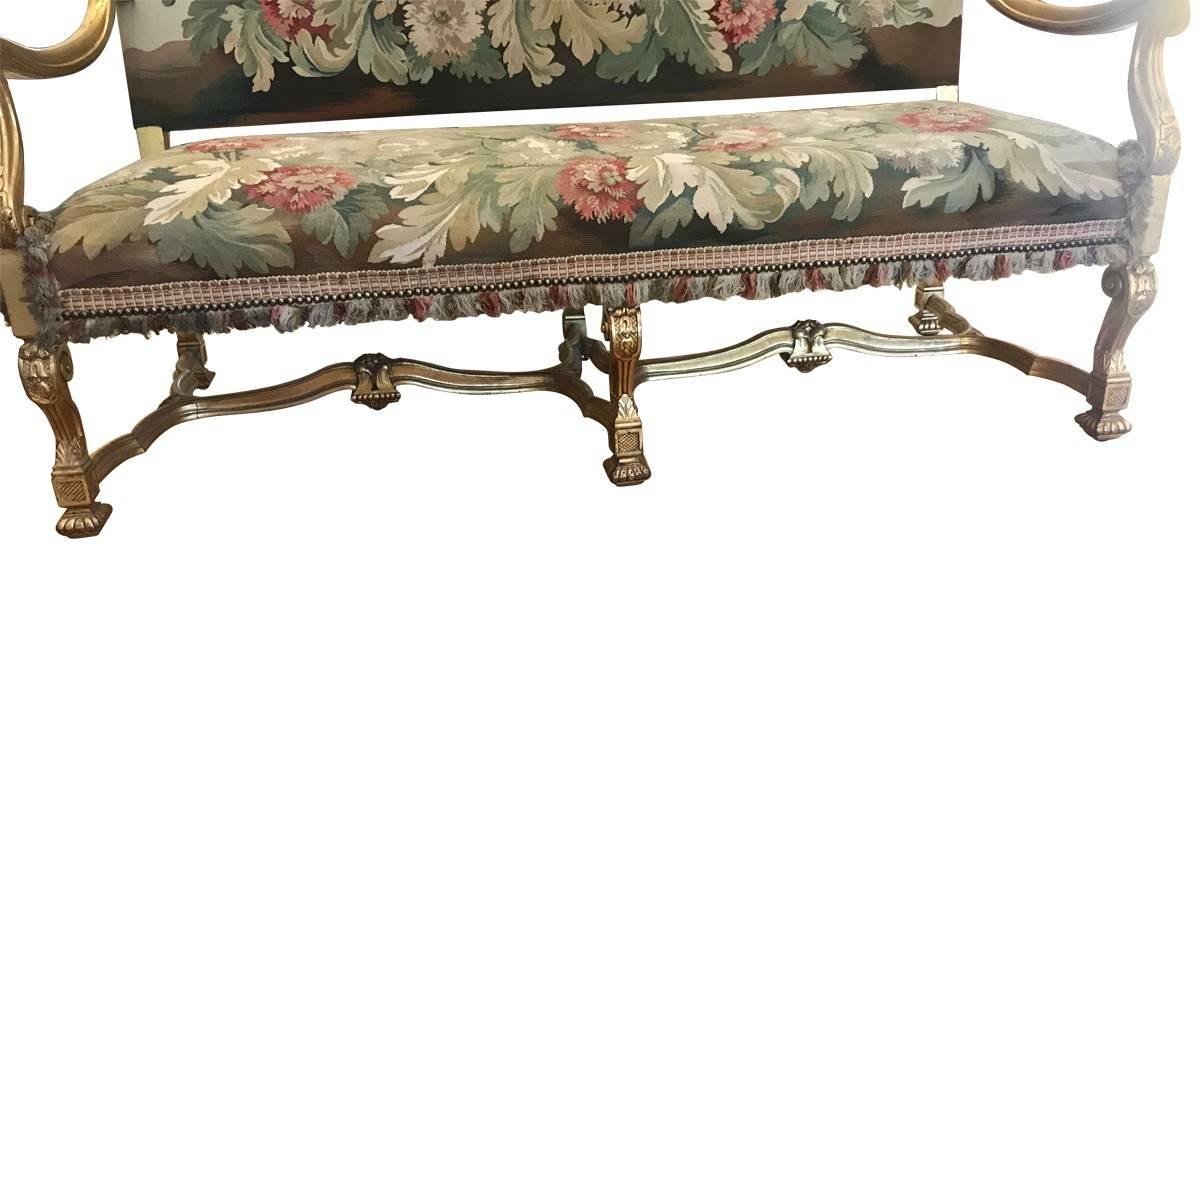 A collectible piece from bygone days, featuring the finest craftsmanship, materials, and design elements of its given era. Elegant and ornate, this stunning settee features a hand-carved giltwood frame and tapestry-style upholstery. Made in France